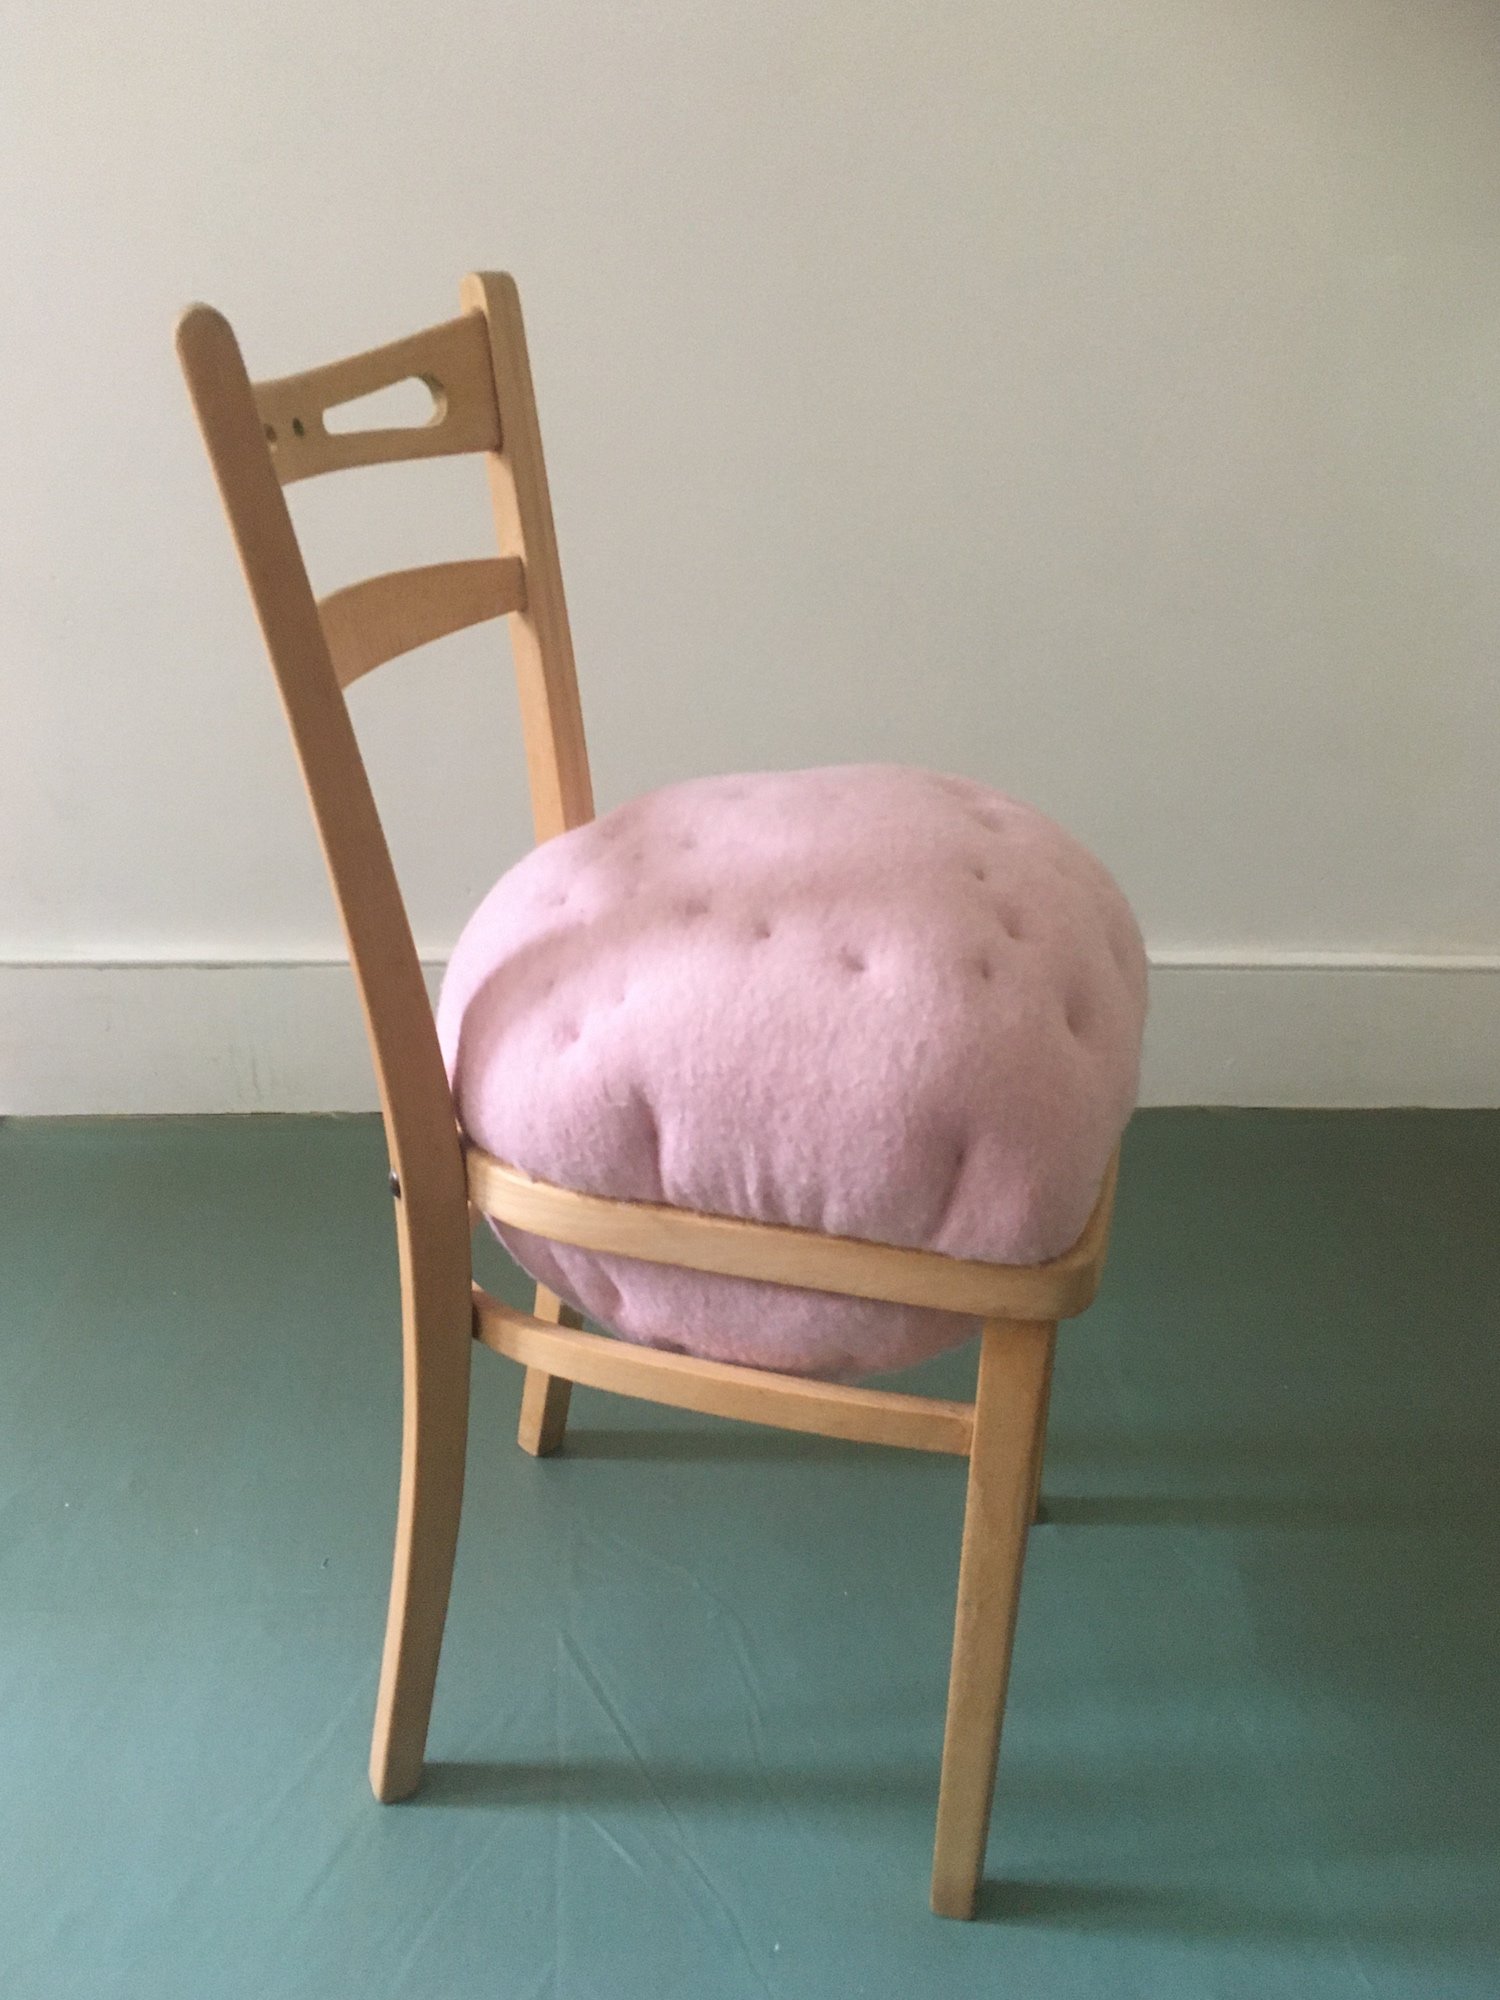   Chimera 1,  2019-20  Found kitchen chair, boiled wool, recycled fibrefill, coconut coir and hessian  